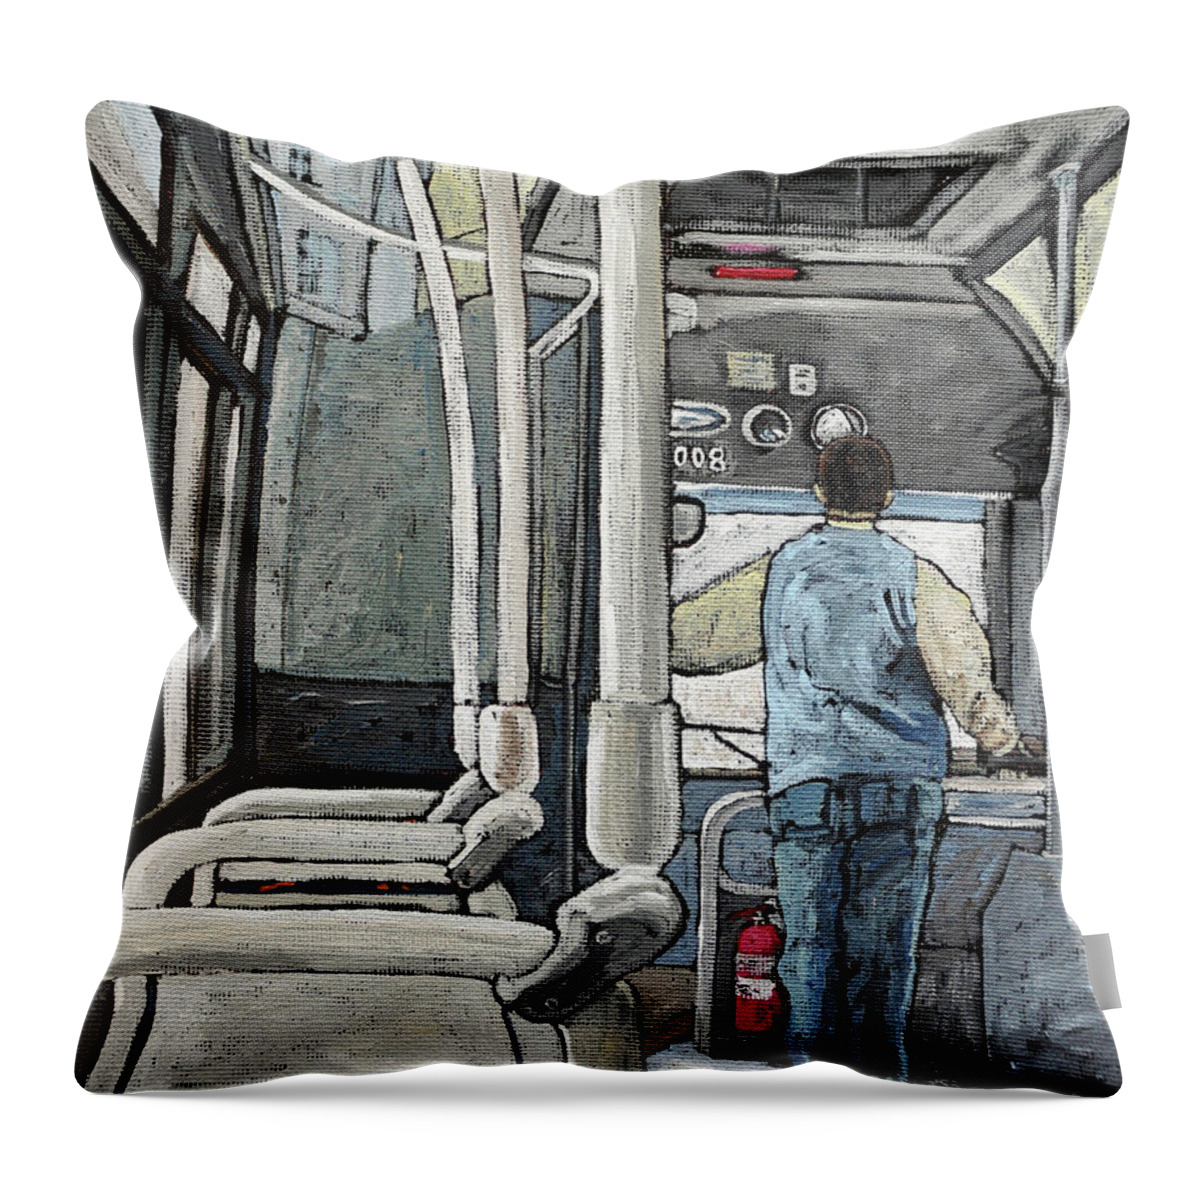 Buses Throw Pillow featuring the painting 107 Bus on a Rainy Day by Reb Frost